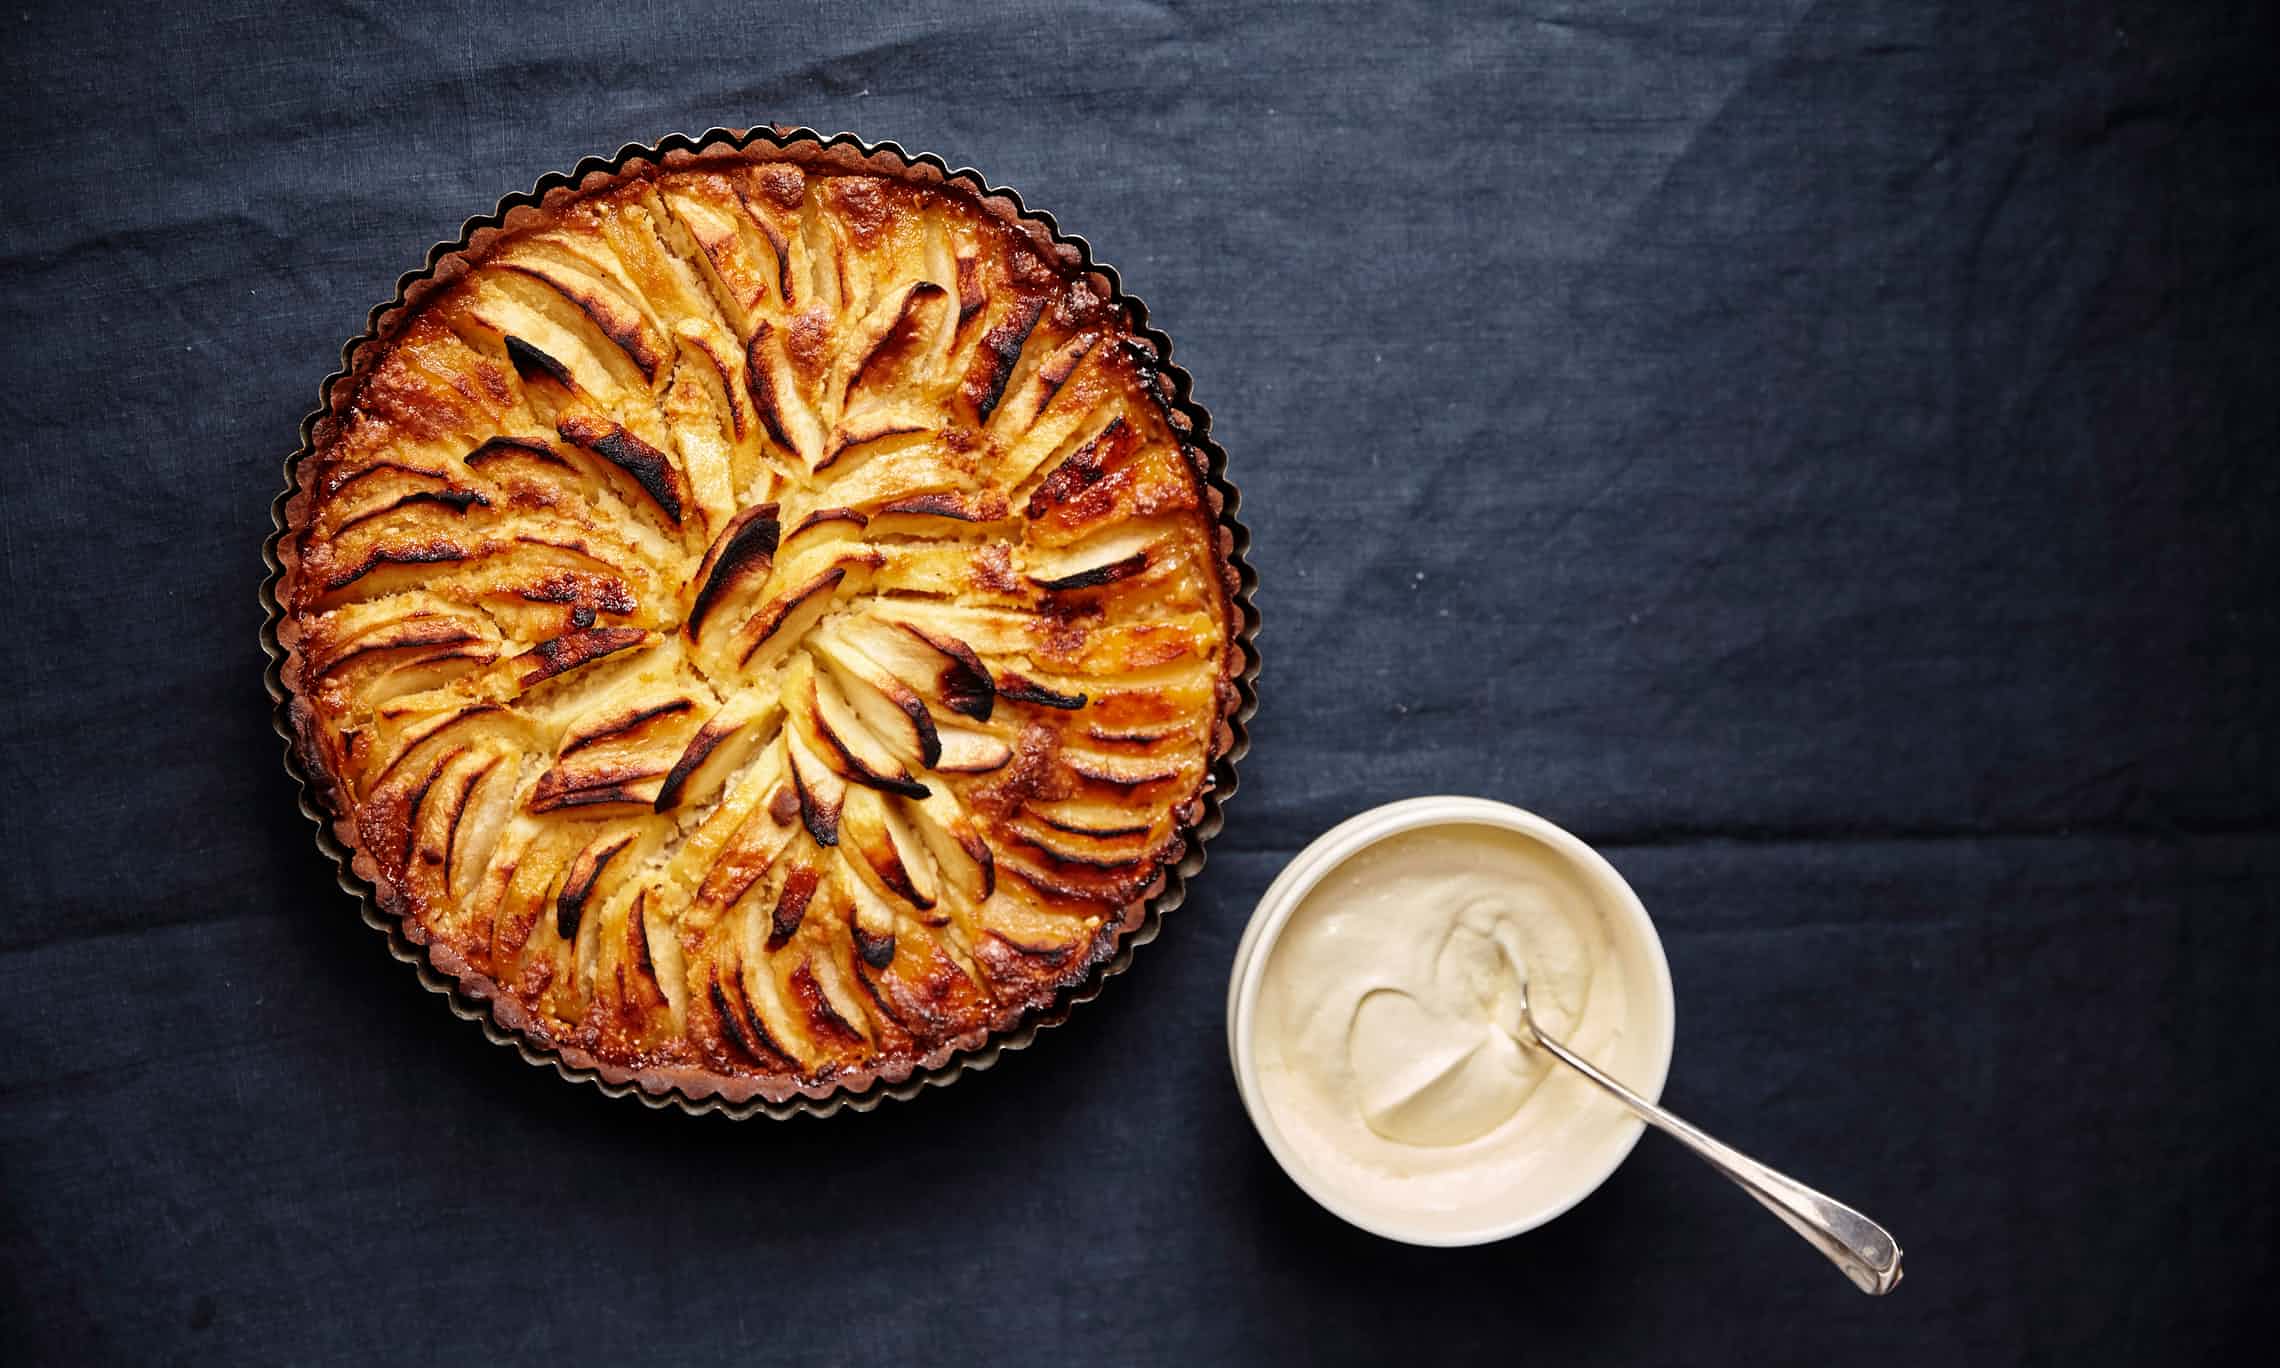 Plum and Almond Tart by Jeremy Lee | The Guardian